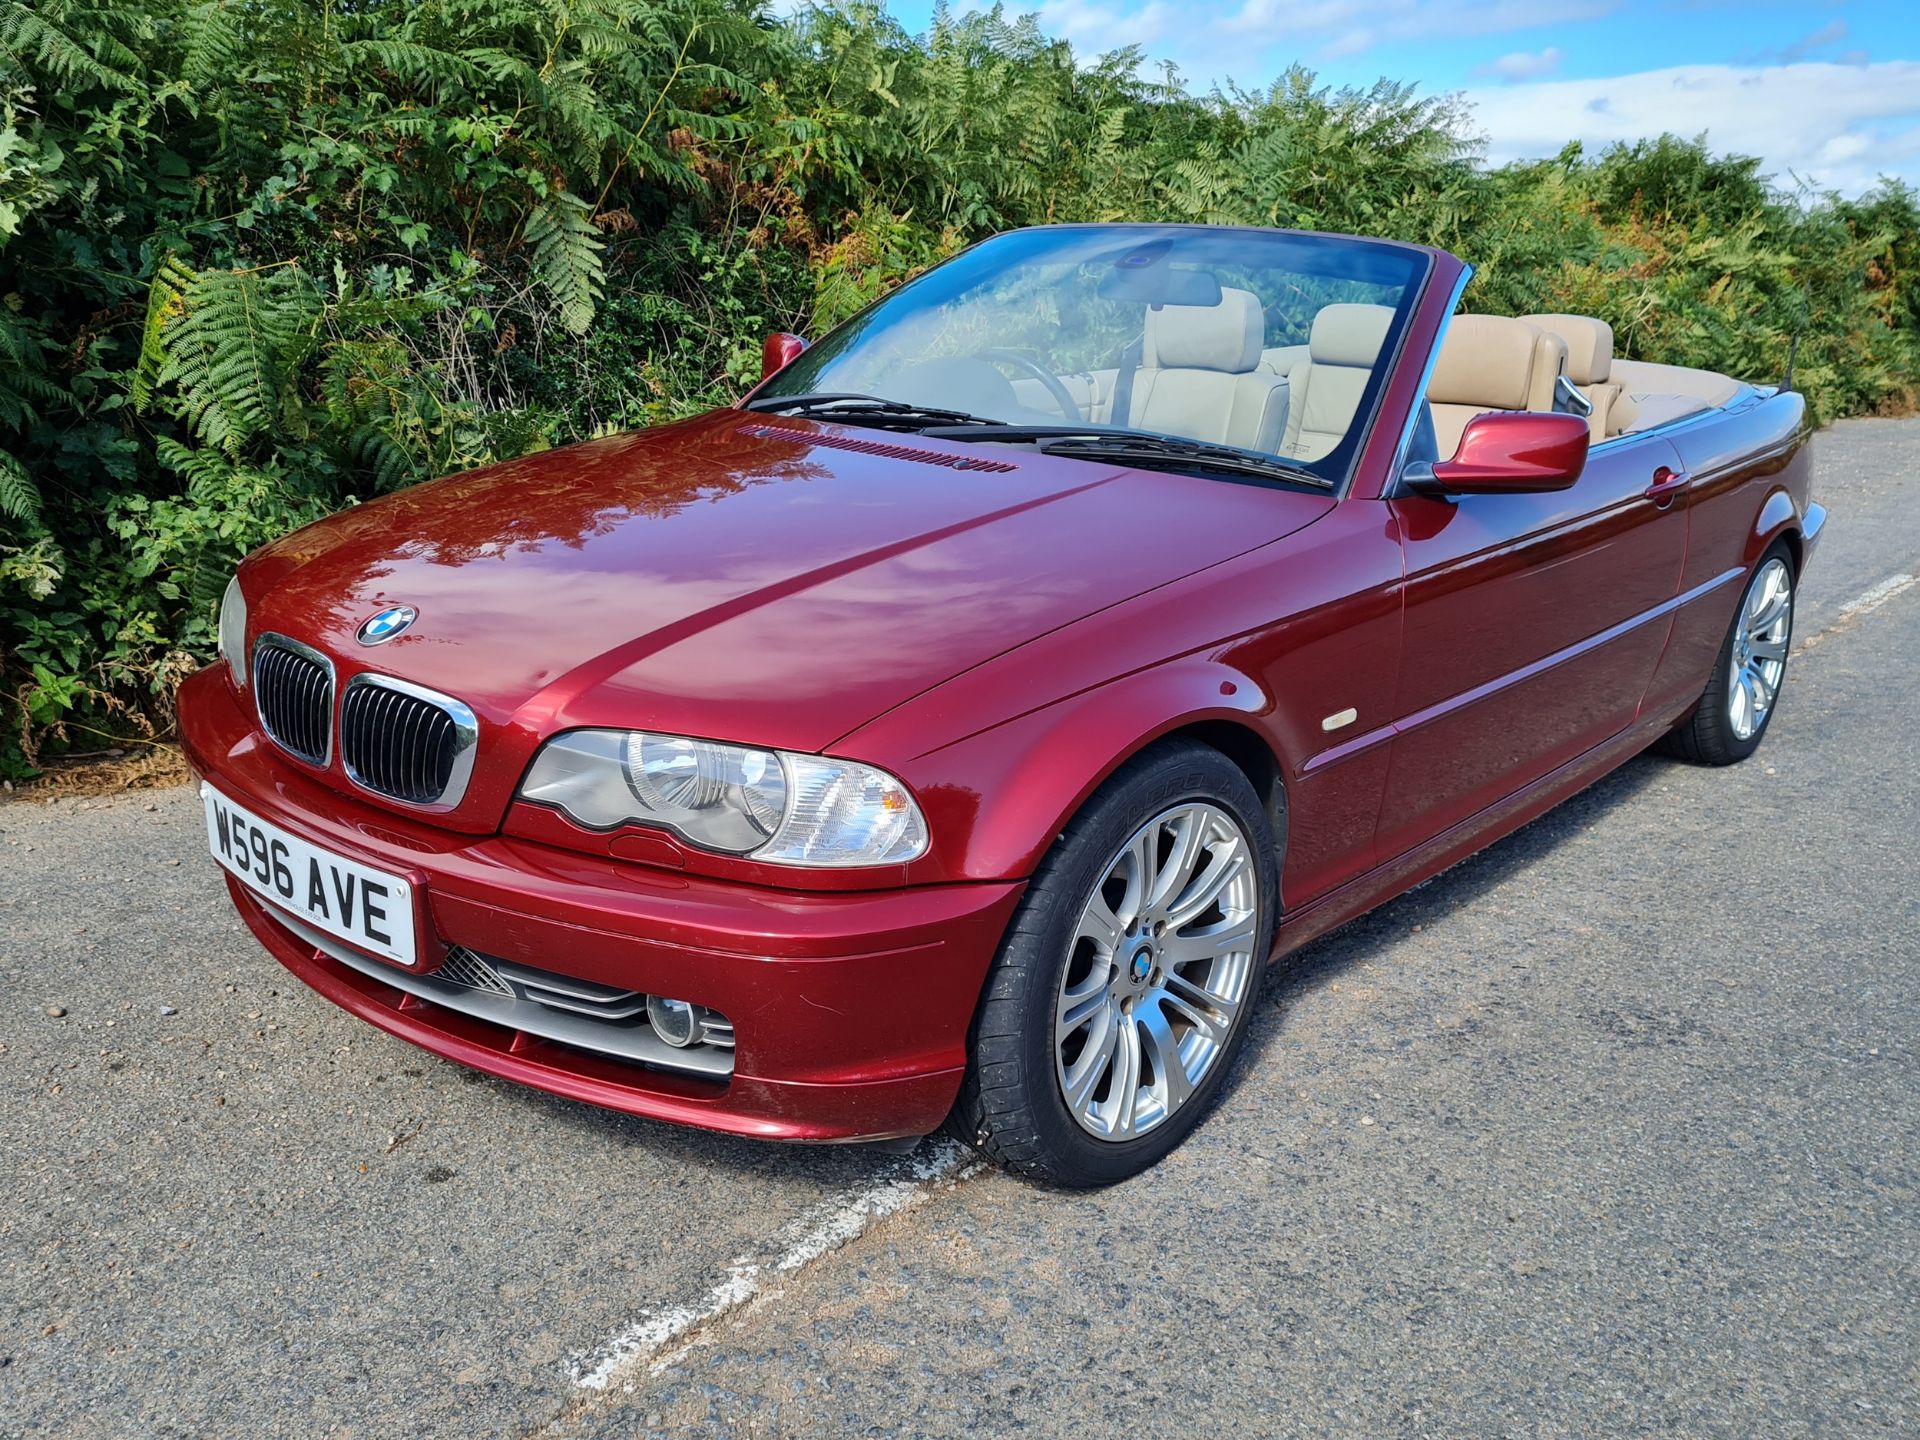 2000 BMW 330Ci Convertible Registration number W596 AVE Chassis number WBABS52060EH92204 Engine